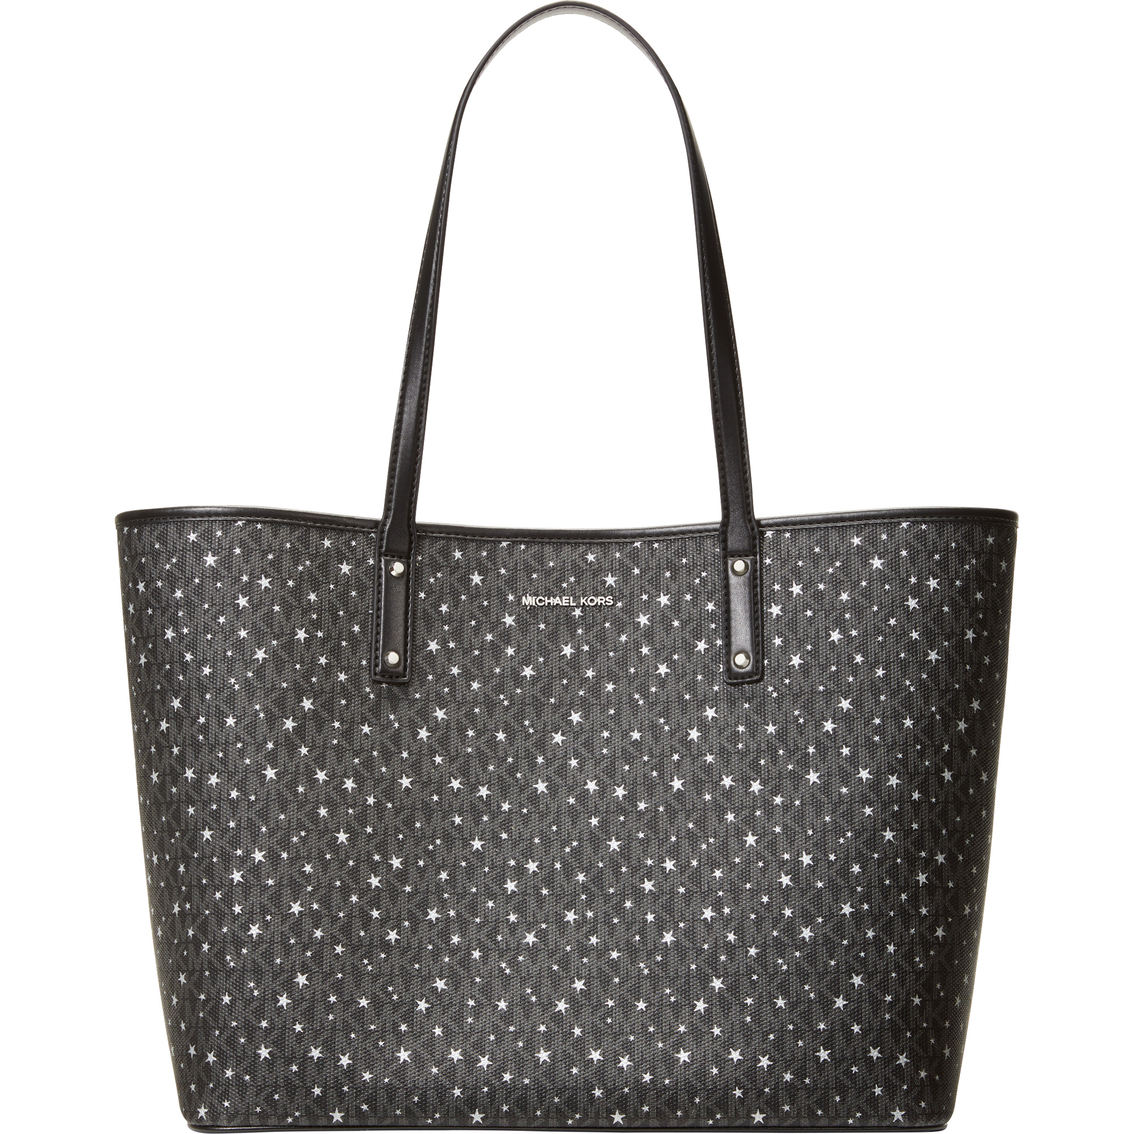 Michael Kors Carter Large Open Tote Bag | Totes & Shoppers | Clothing ...